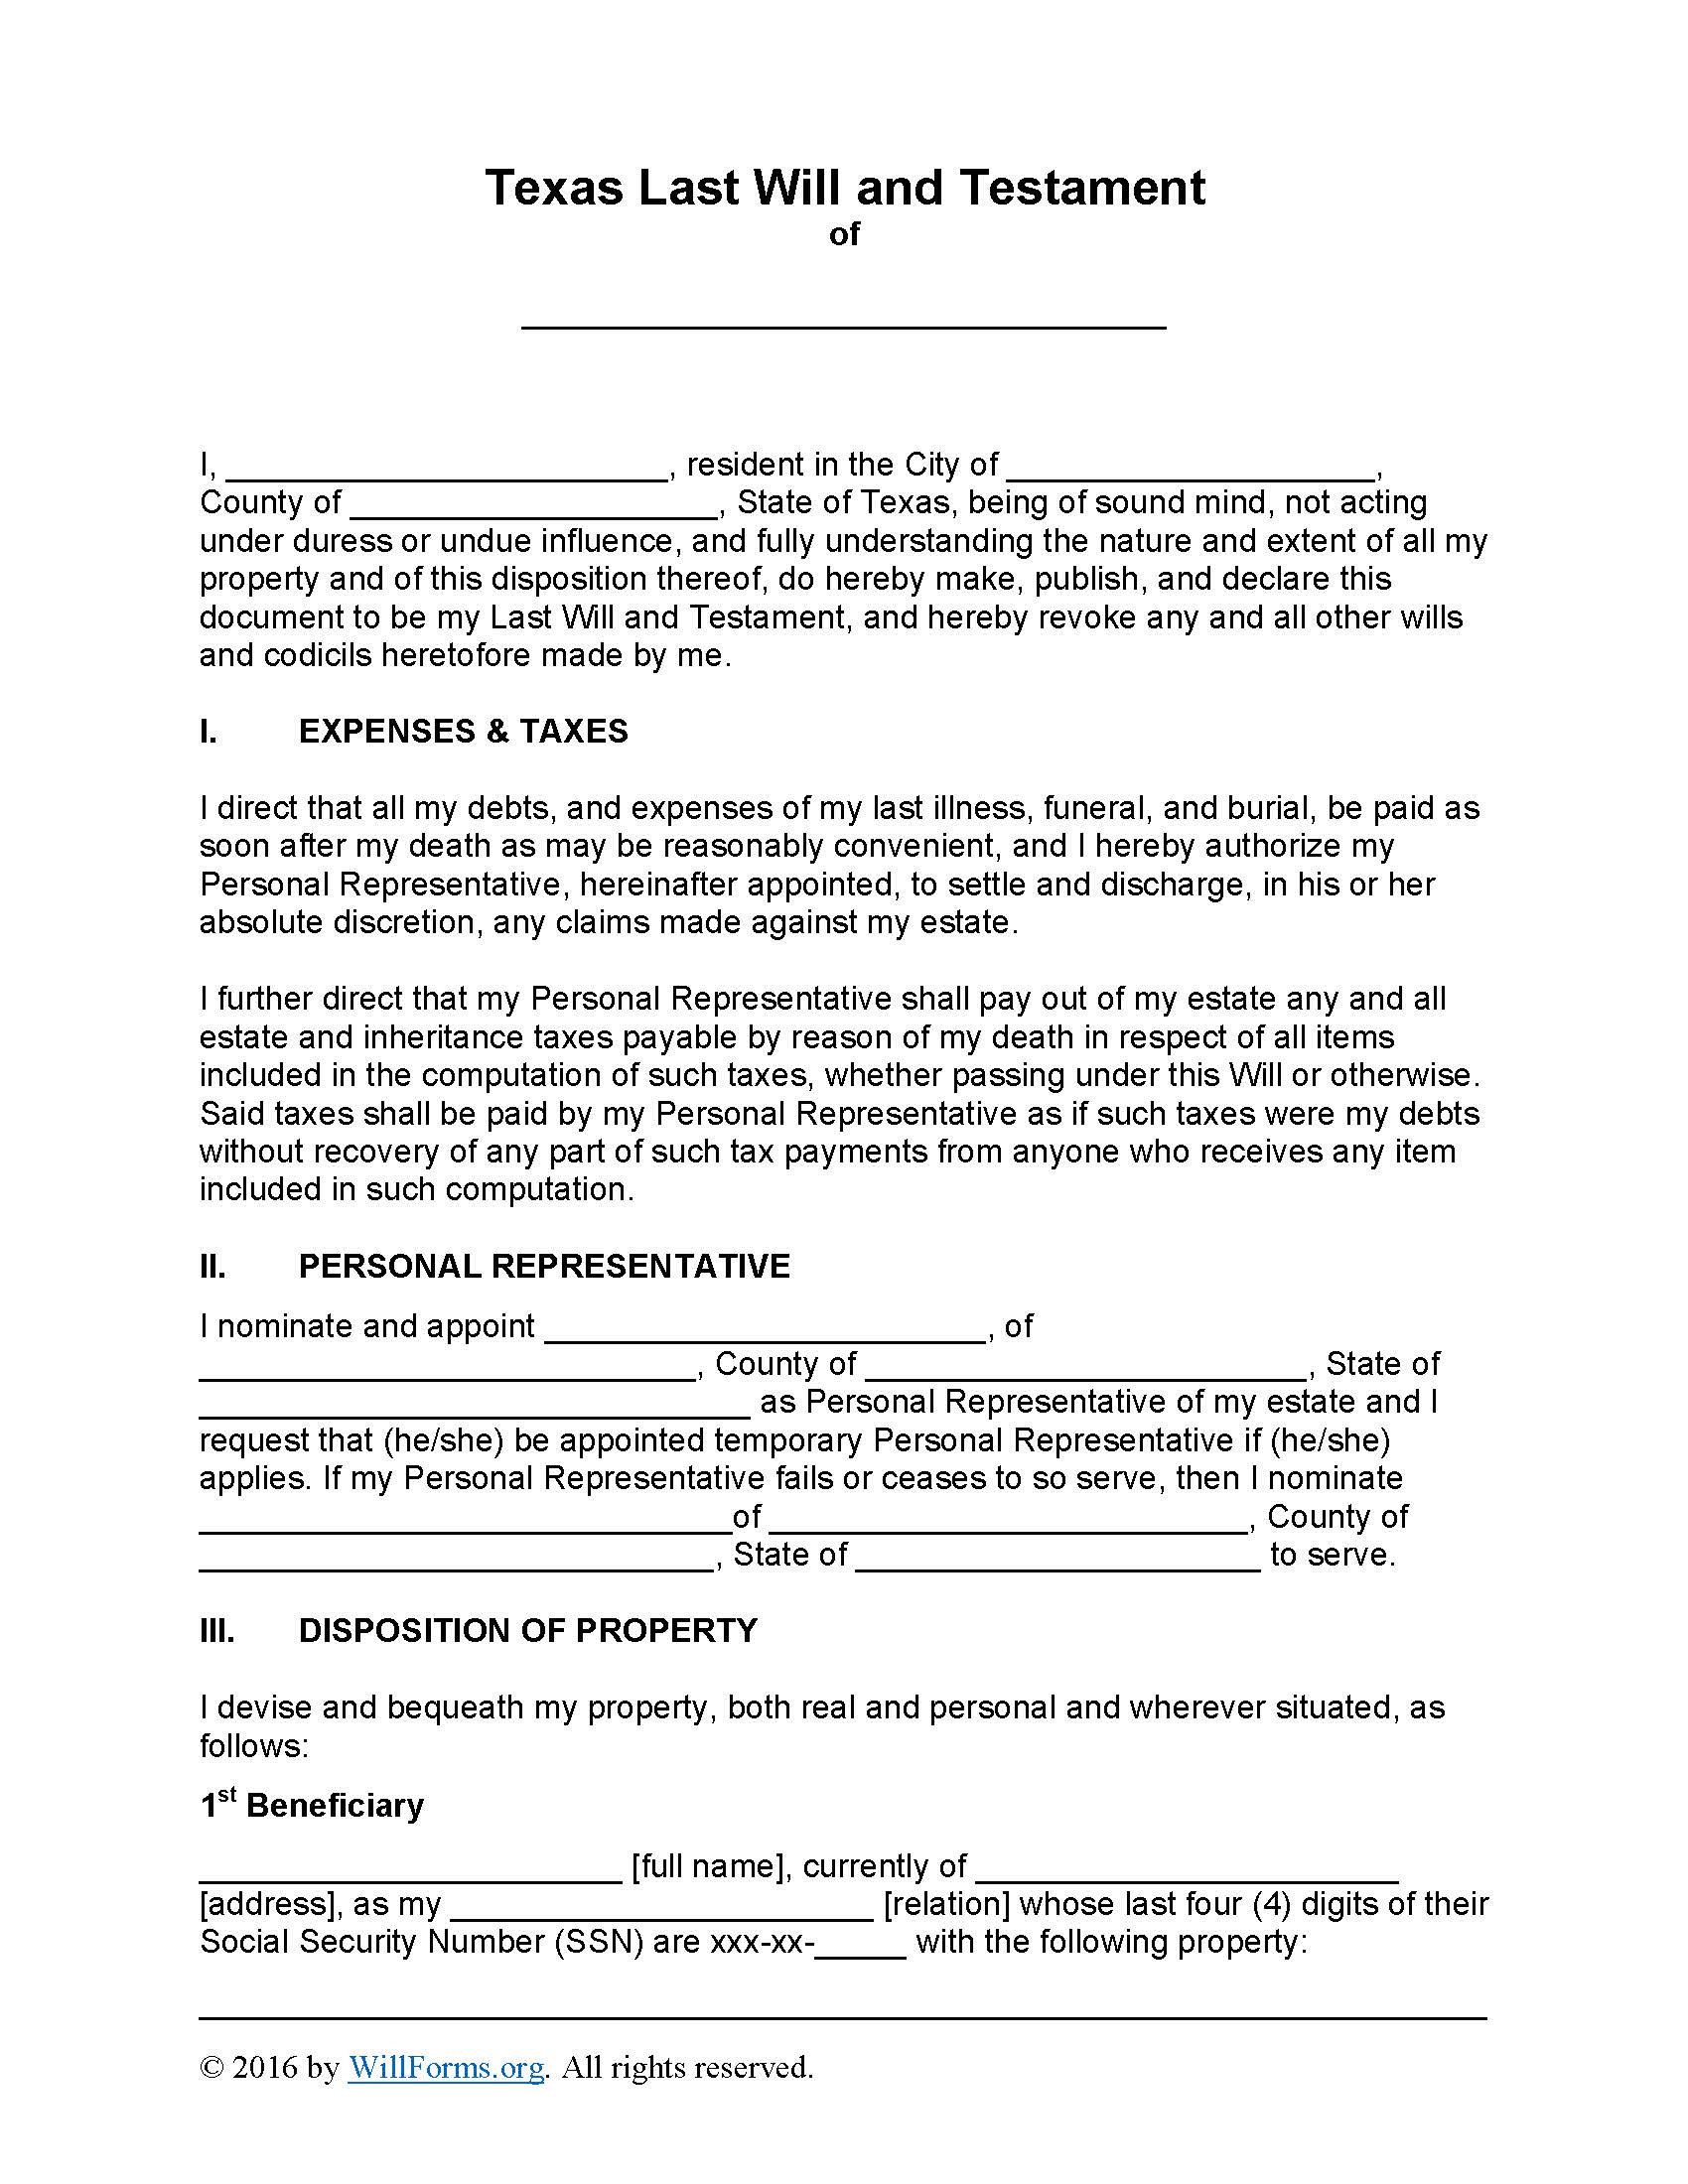 Texas Last Will and Testament Form